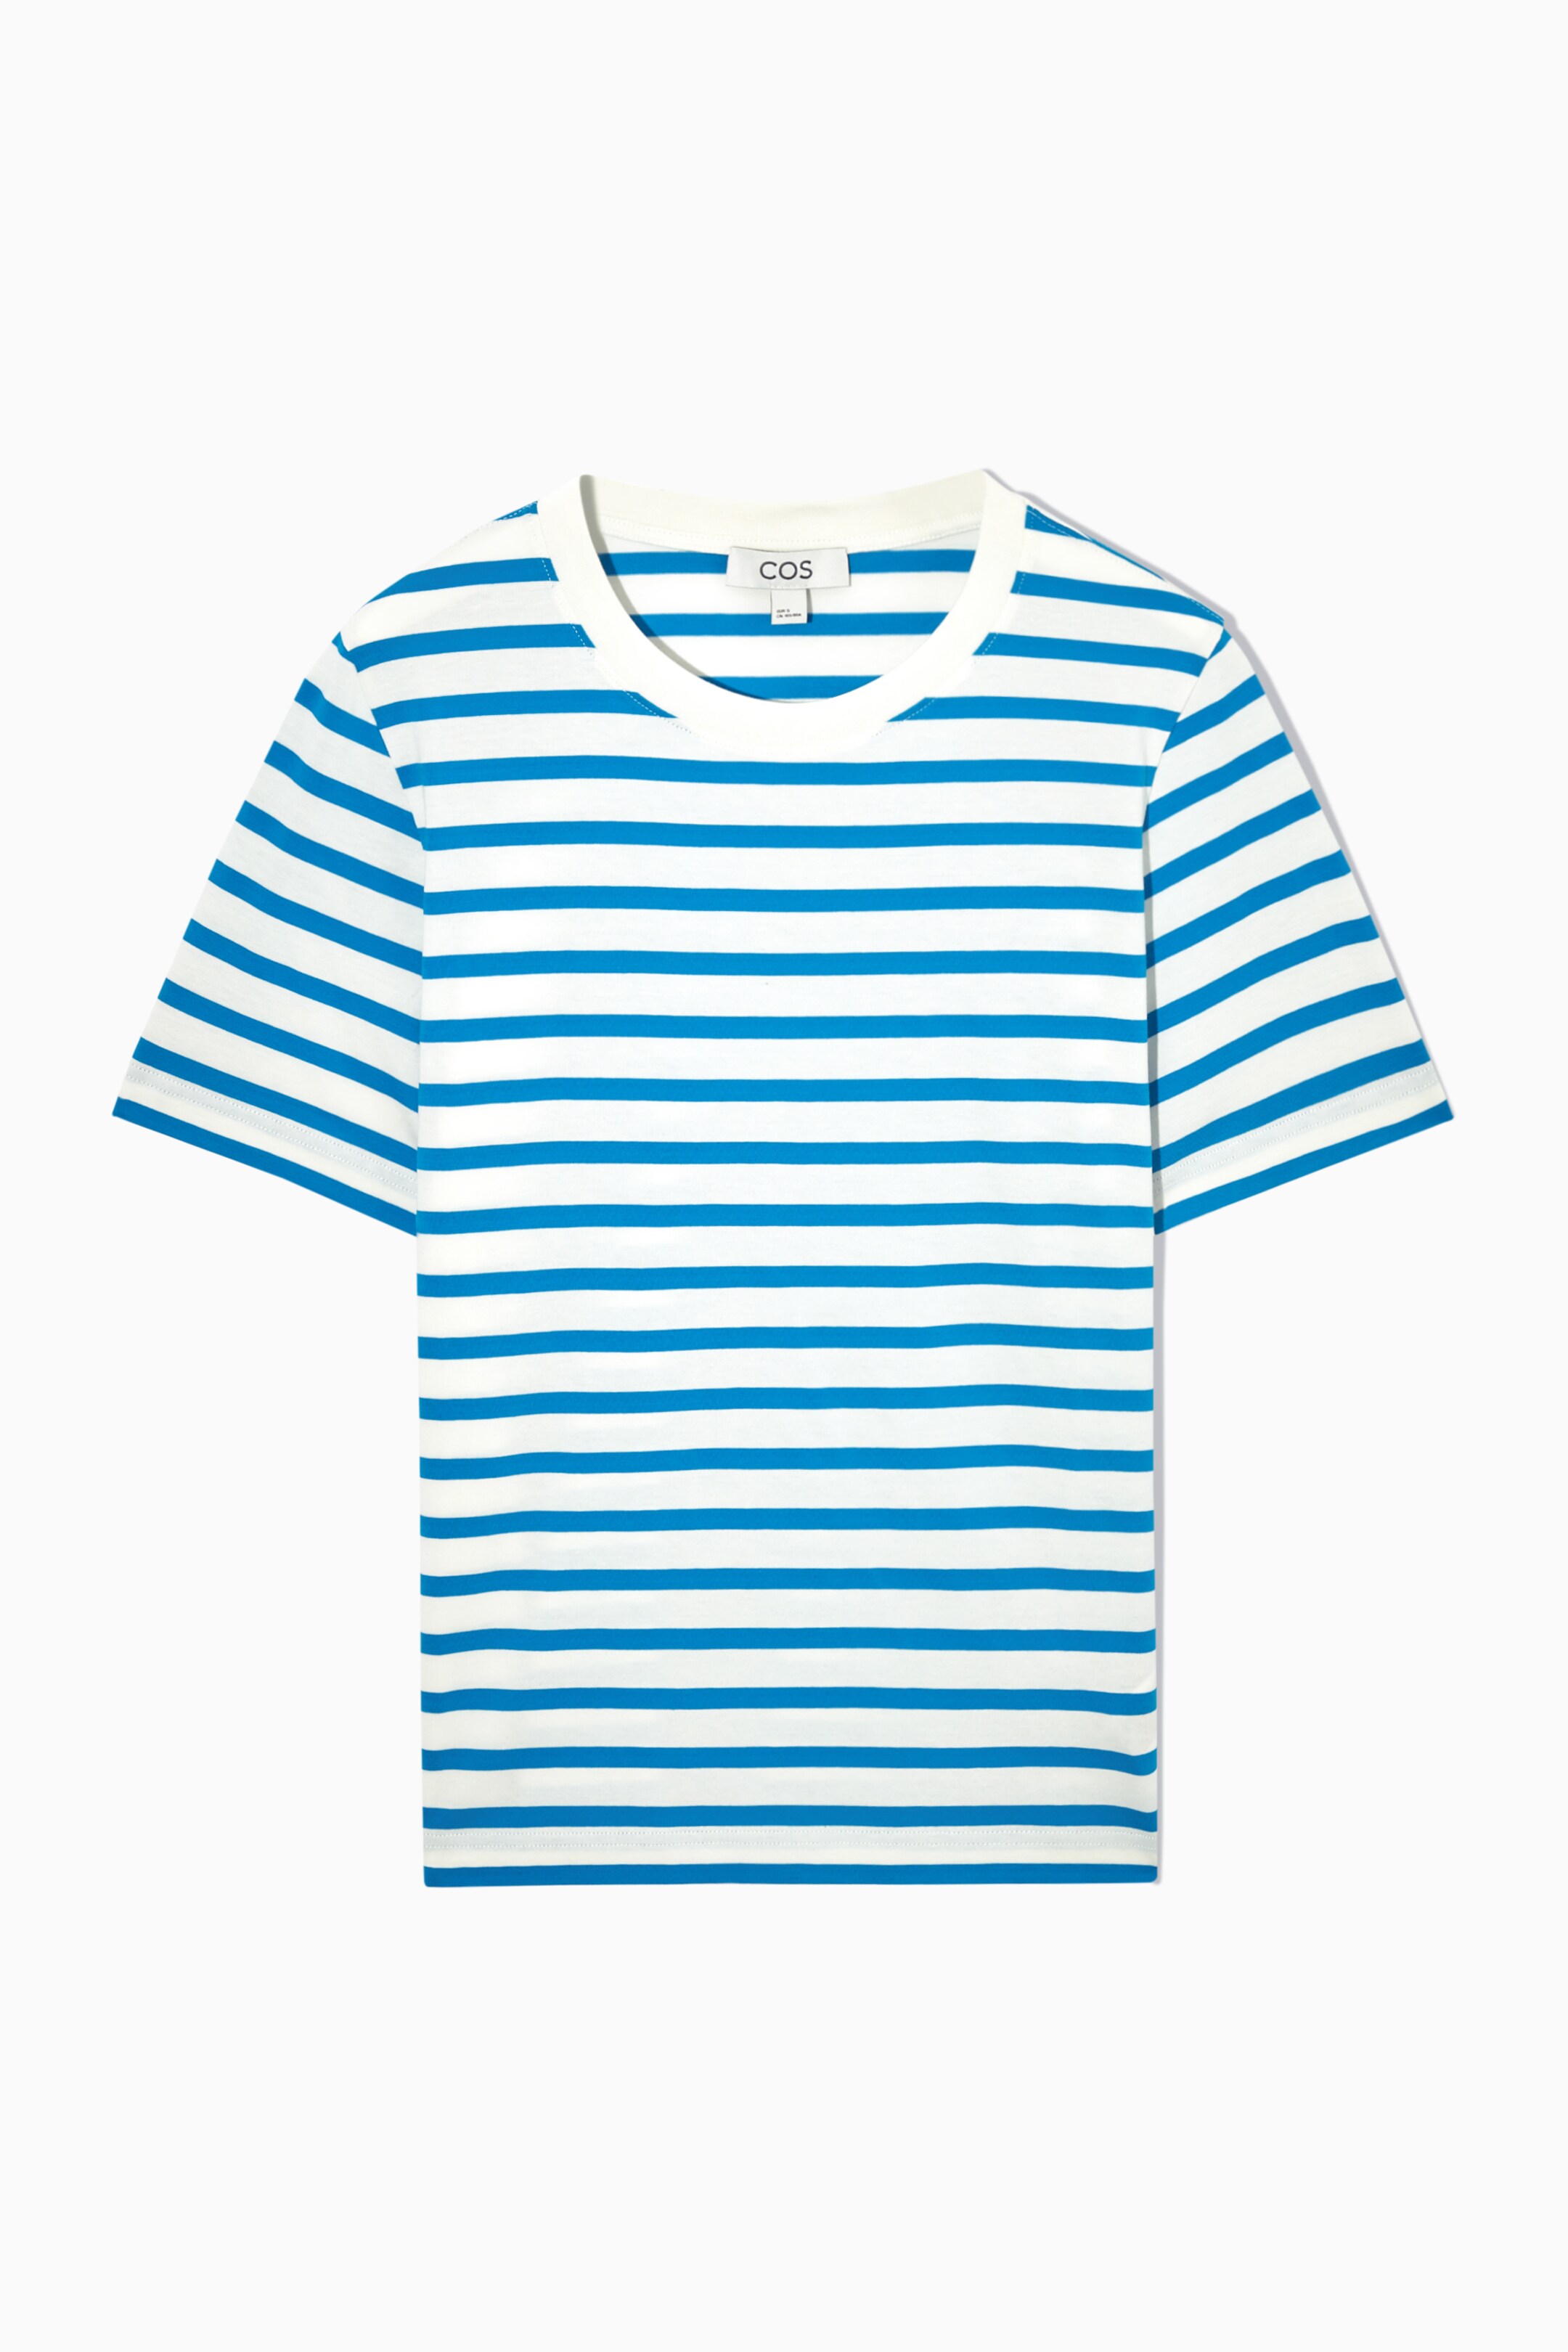 Front image of cos REGULAR FIT T-SHIRT in BLUE / WHITE